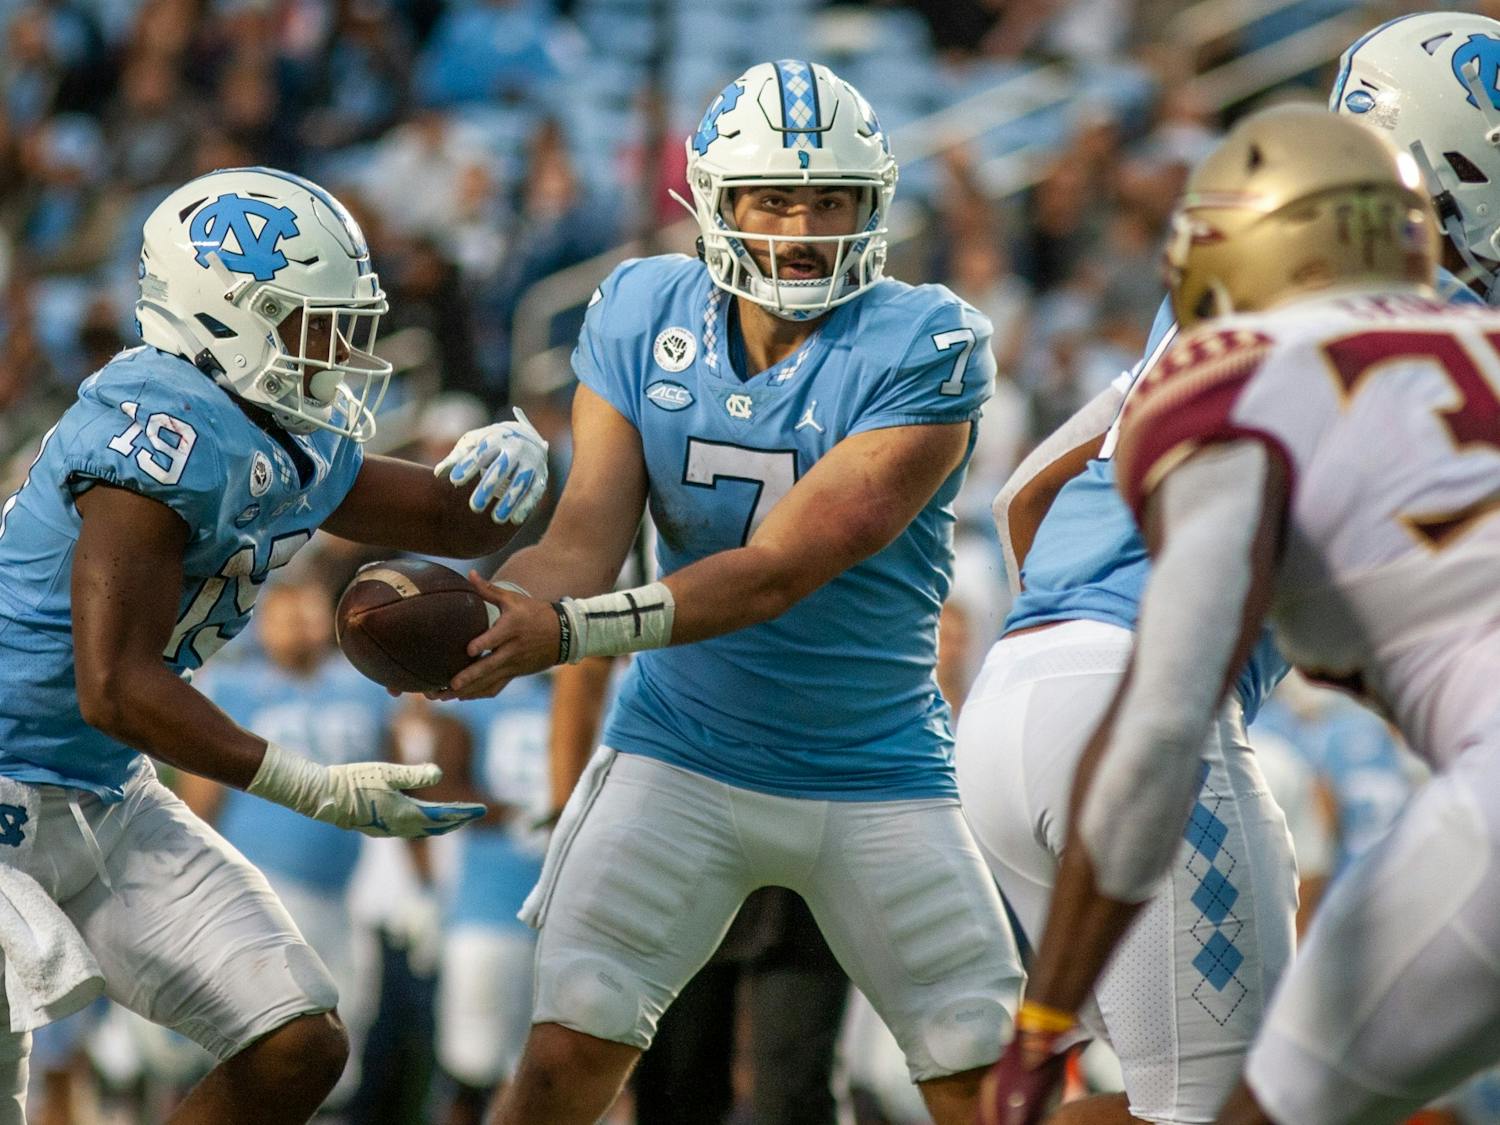 UNC junior quarterback Sam Howell (7) hands the ball off graduate running back Ty Chandler (19) during the Tar Heels' home football game in Kena Stadium on Oct. 9 against the Florida State Seminoles. FSU won 35-25.